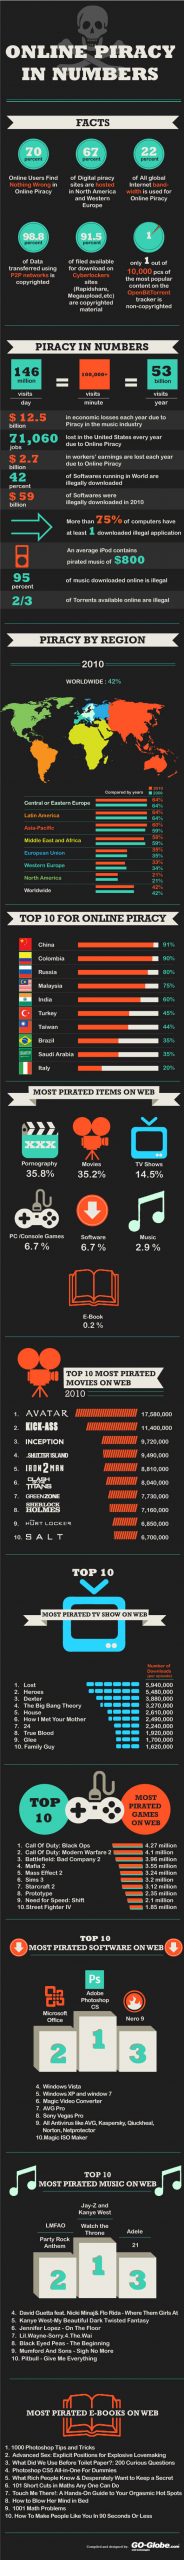 Online Piracy in Numbers - Facts and Statistics